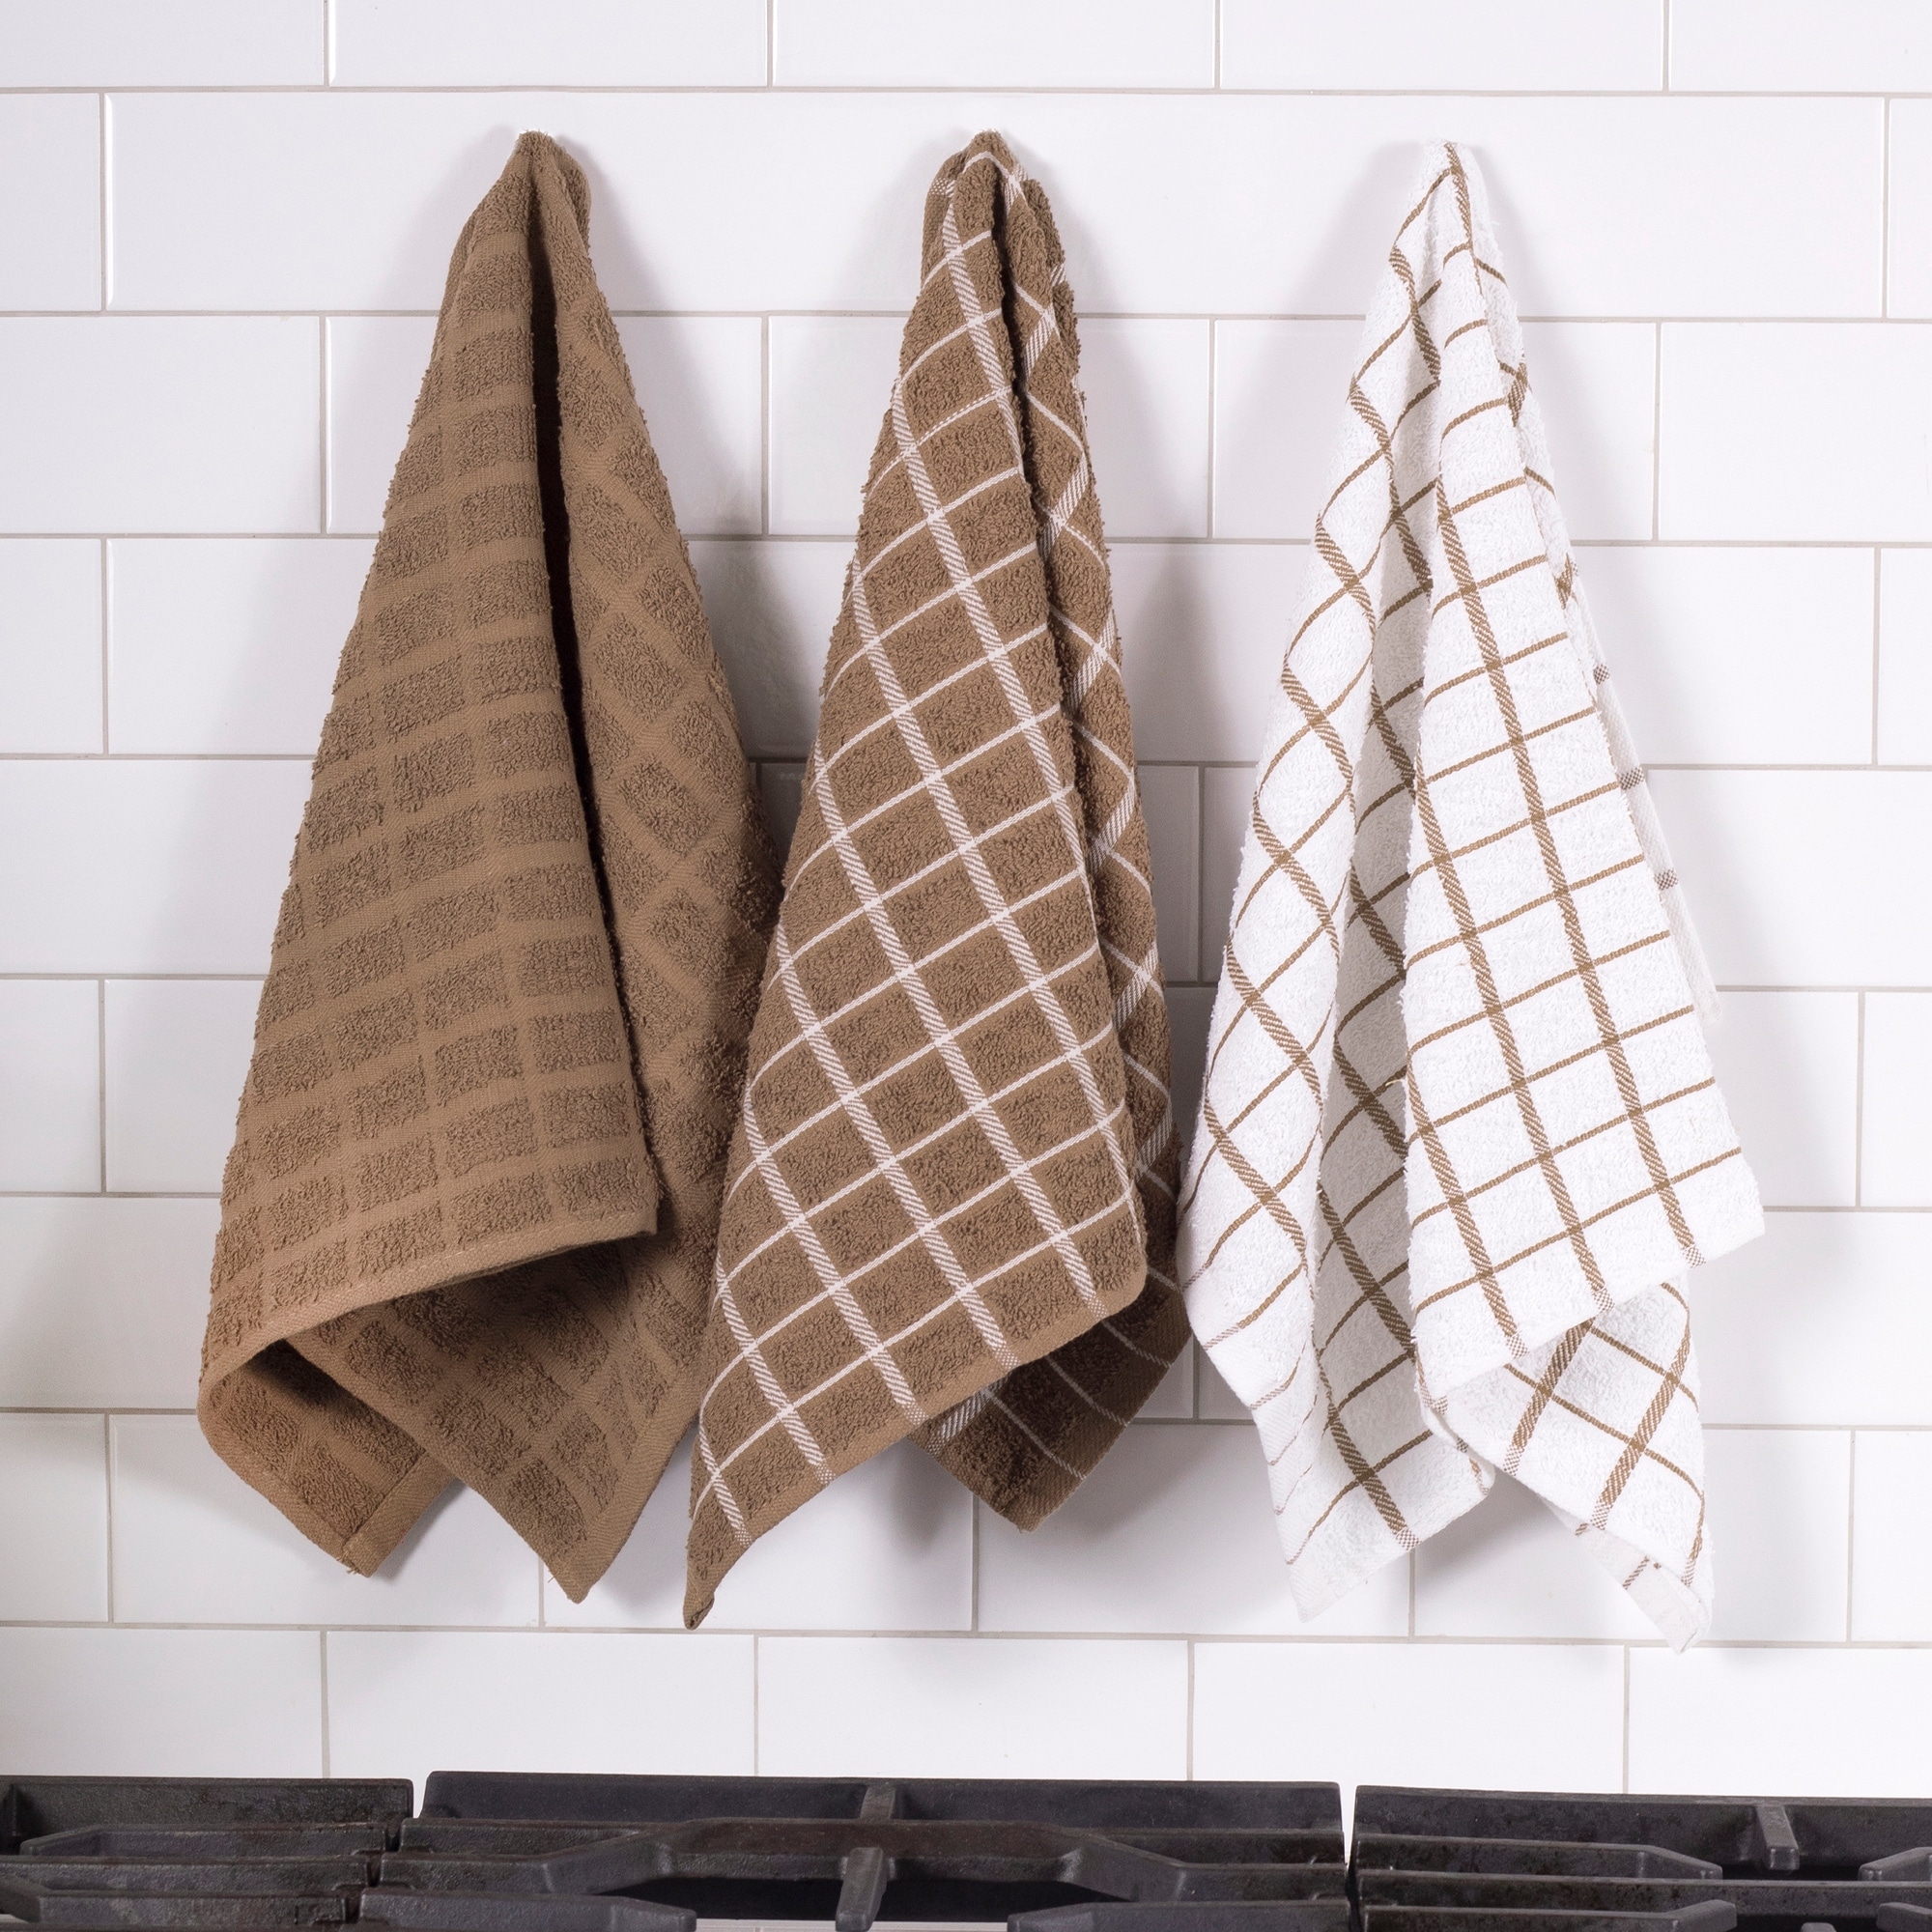 https://ak1.ostkcdn.com/images/products/is/images/direct/eabbf41fe73452f99d2e45a763d7beda1cbf4499/RITZ-Terry-Check-Kitchen-Towel%2C-Set-of-3.jpg